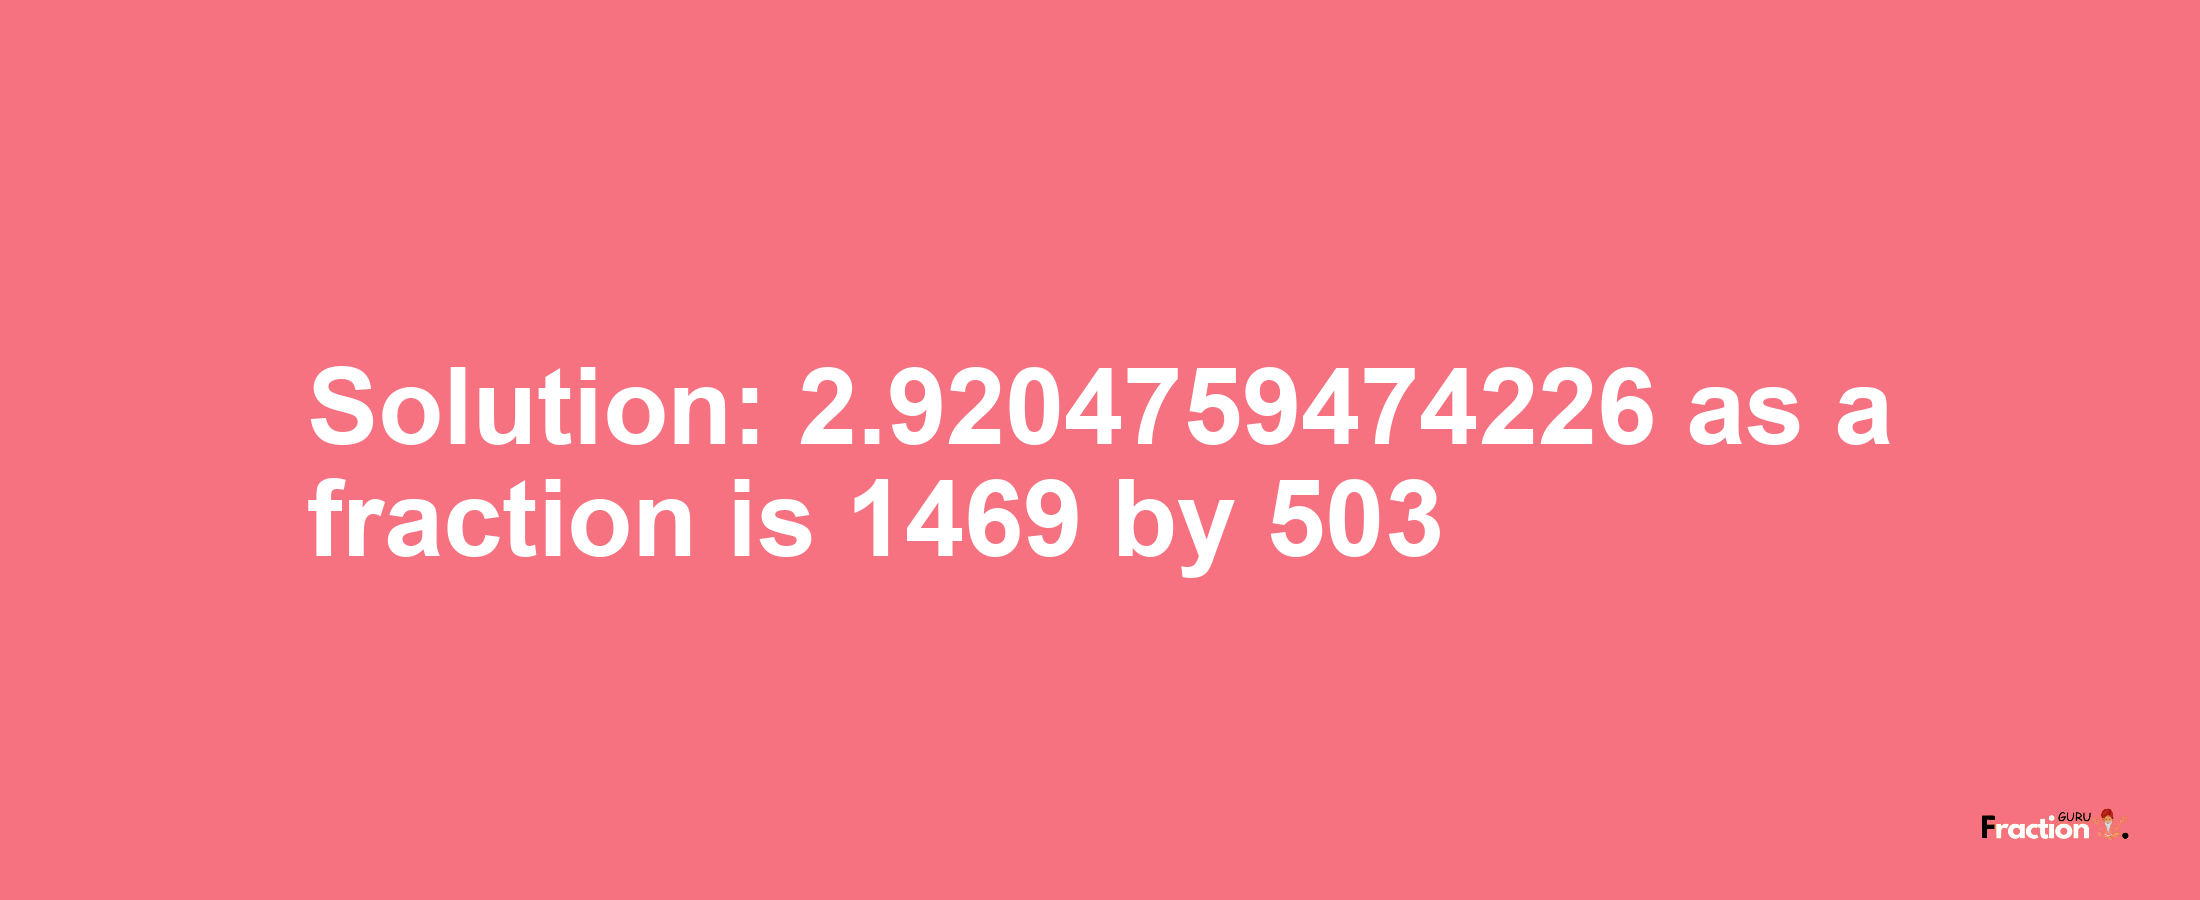 Solution:2.9204759474226 as a fraction is 1469/503